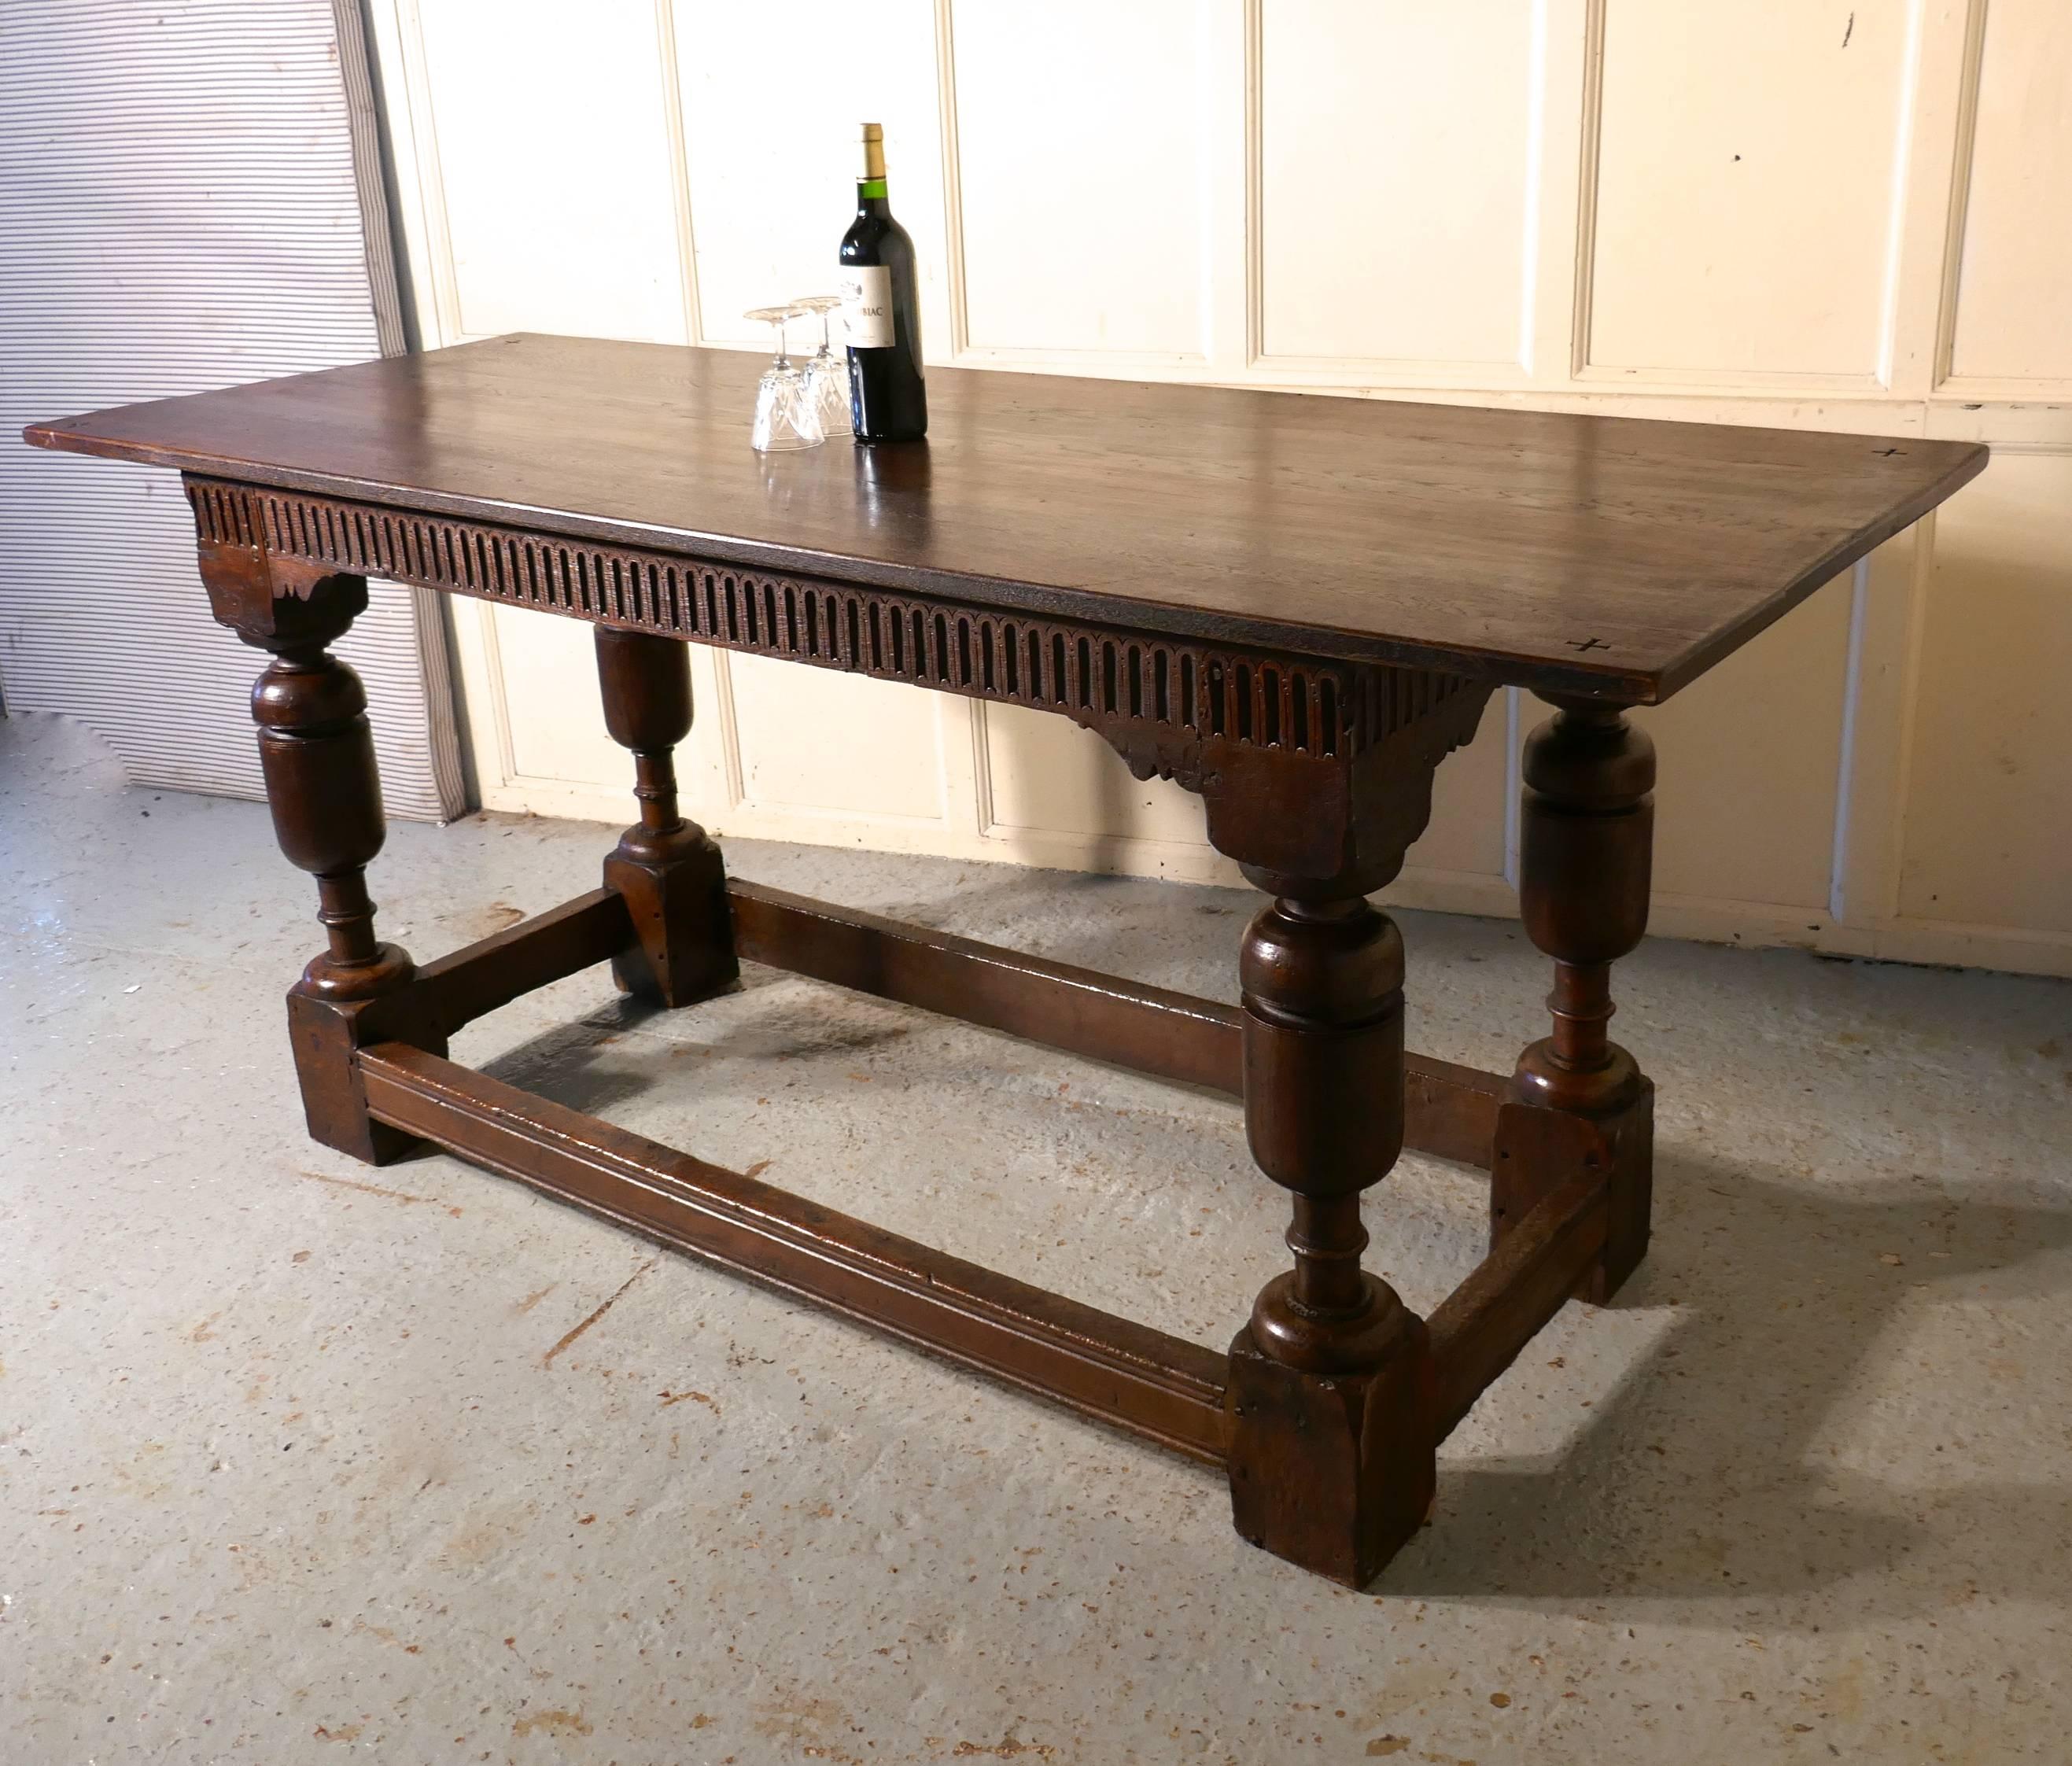 Arts & Crafts Gothic carved oak table 

This is a wonderful table, the table base is an early piece with large bulbous legs, and the apron below has a linen fold carving all the way around. The three plank top dates from the 19th century, it has